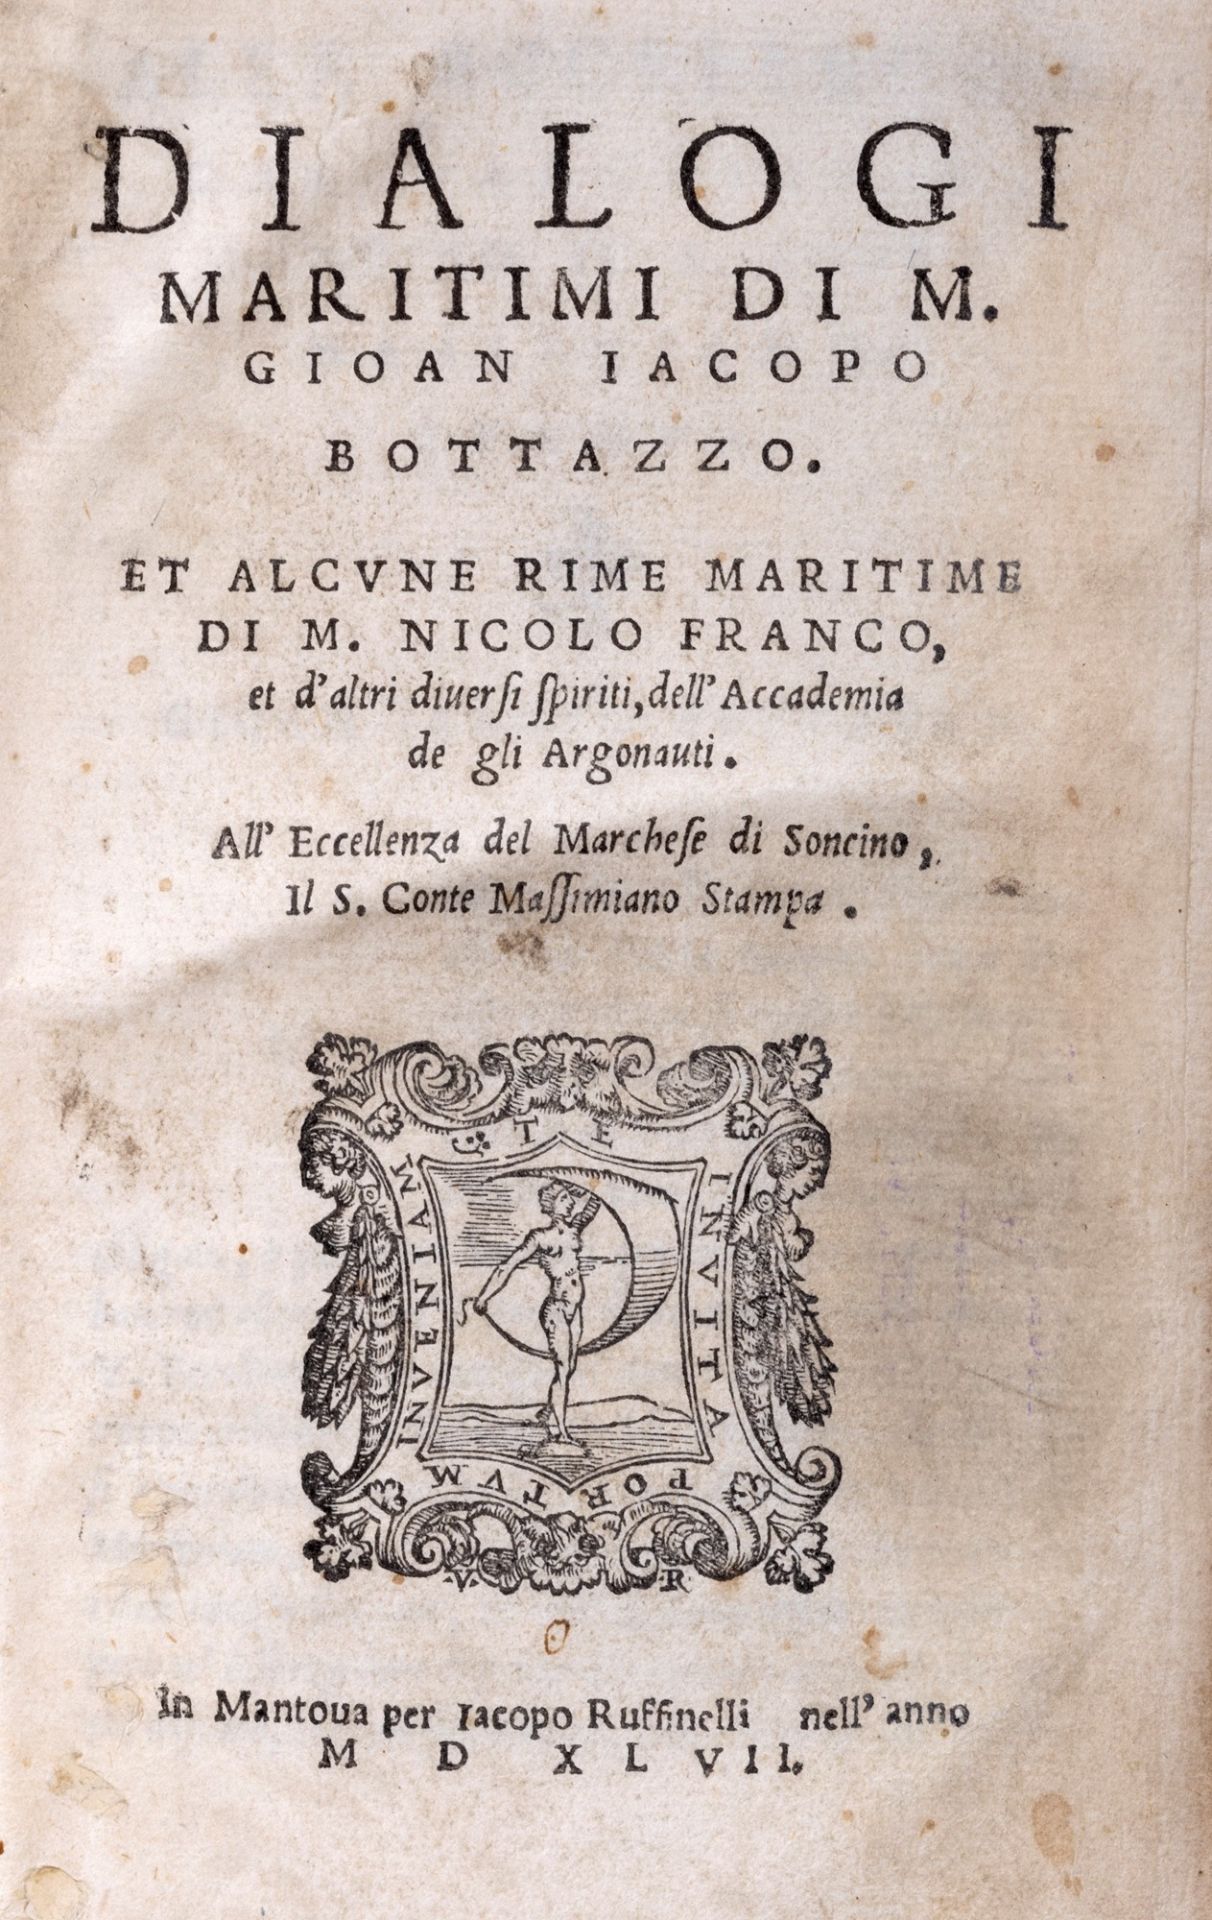 Bottazzi, Gioan Iacolo - Maritime dialogues and some maritime rhymes by M. Nicolò Franco and other s